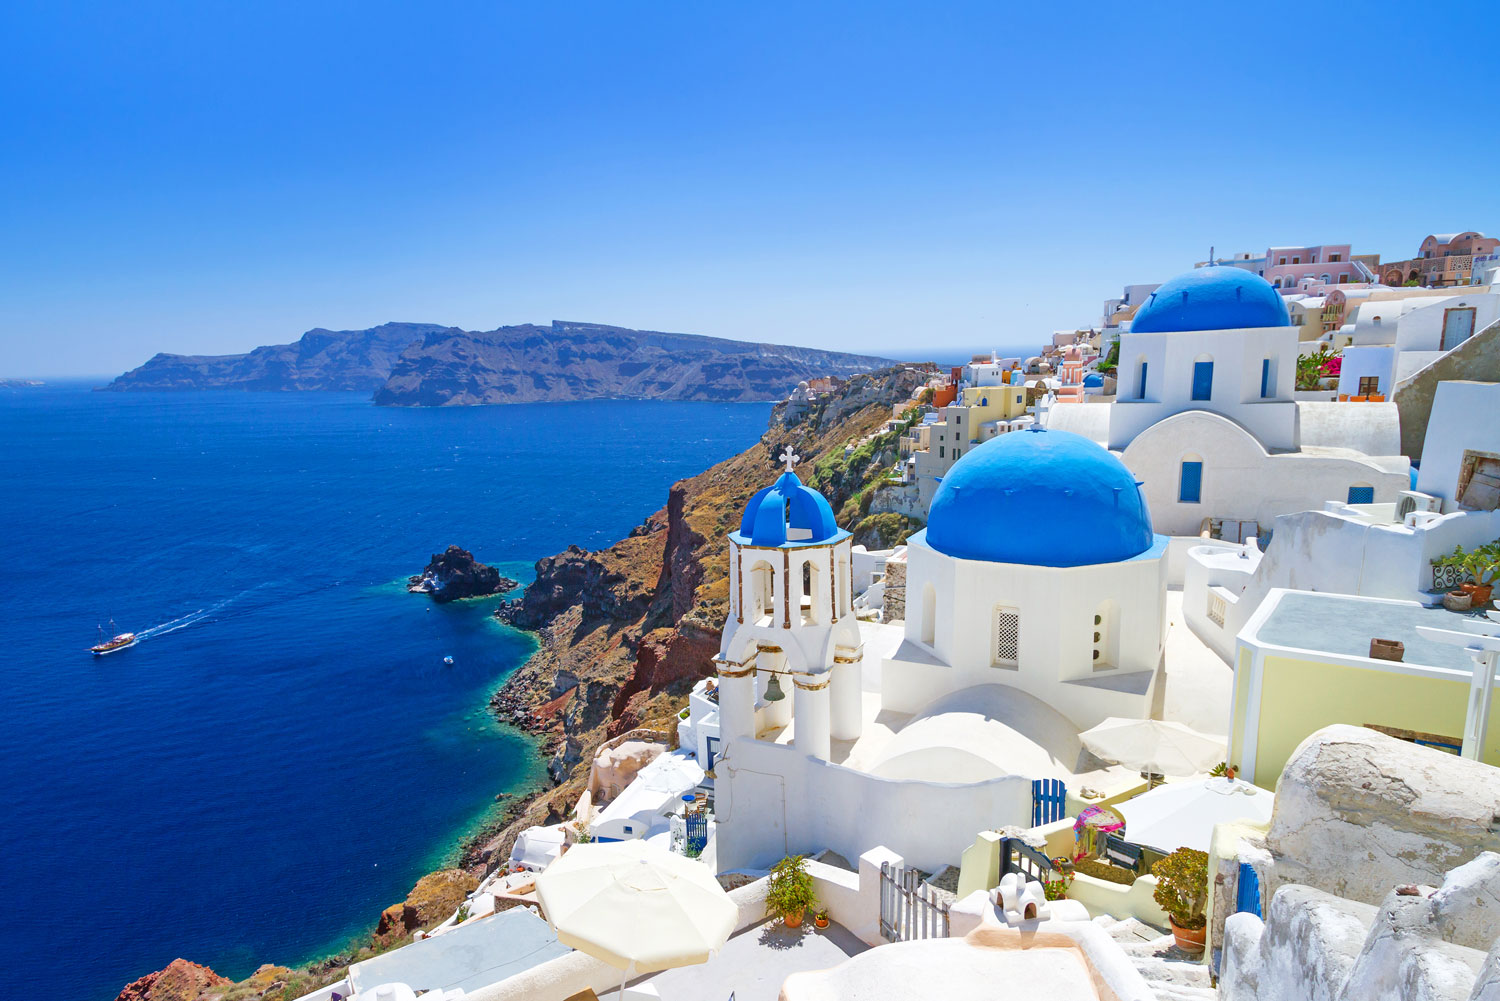 This Is Hardest General Knowledge Quiz You'll Ever Take, I Promise Greek island